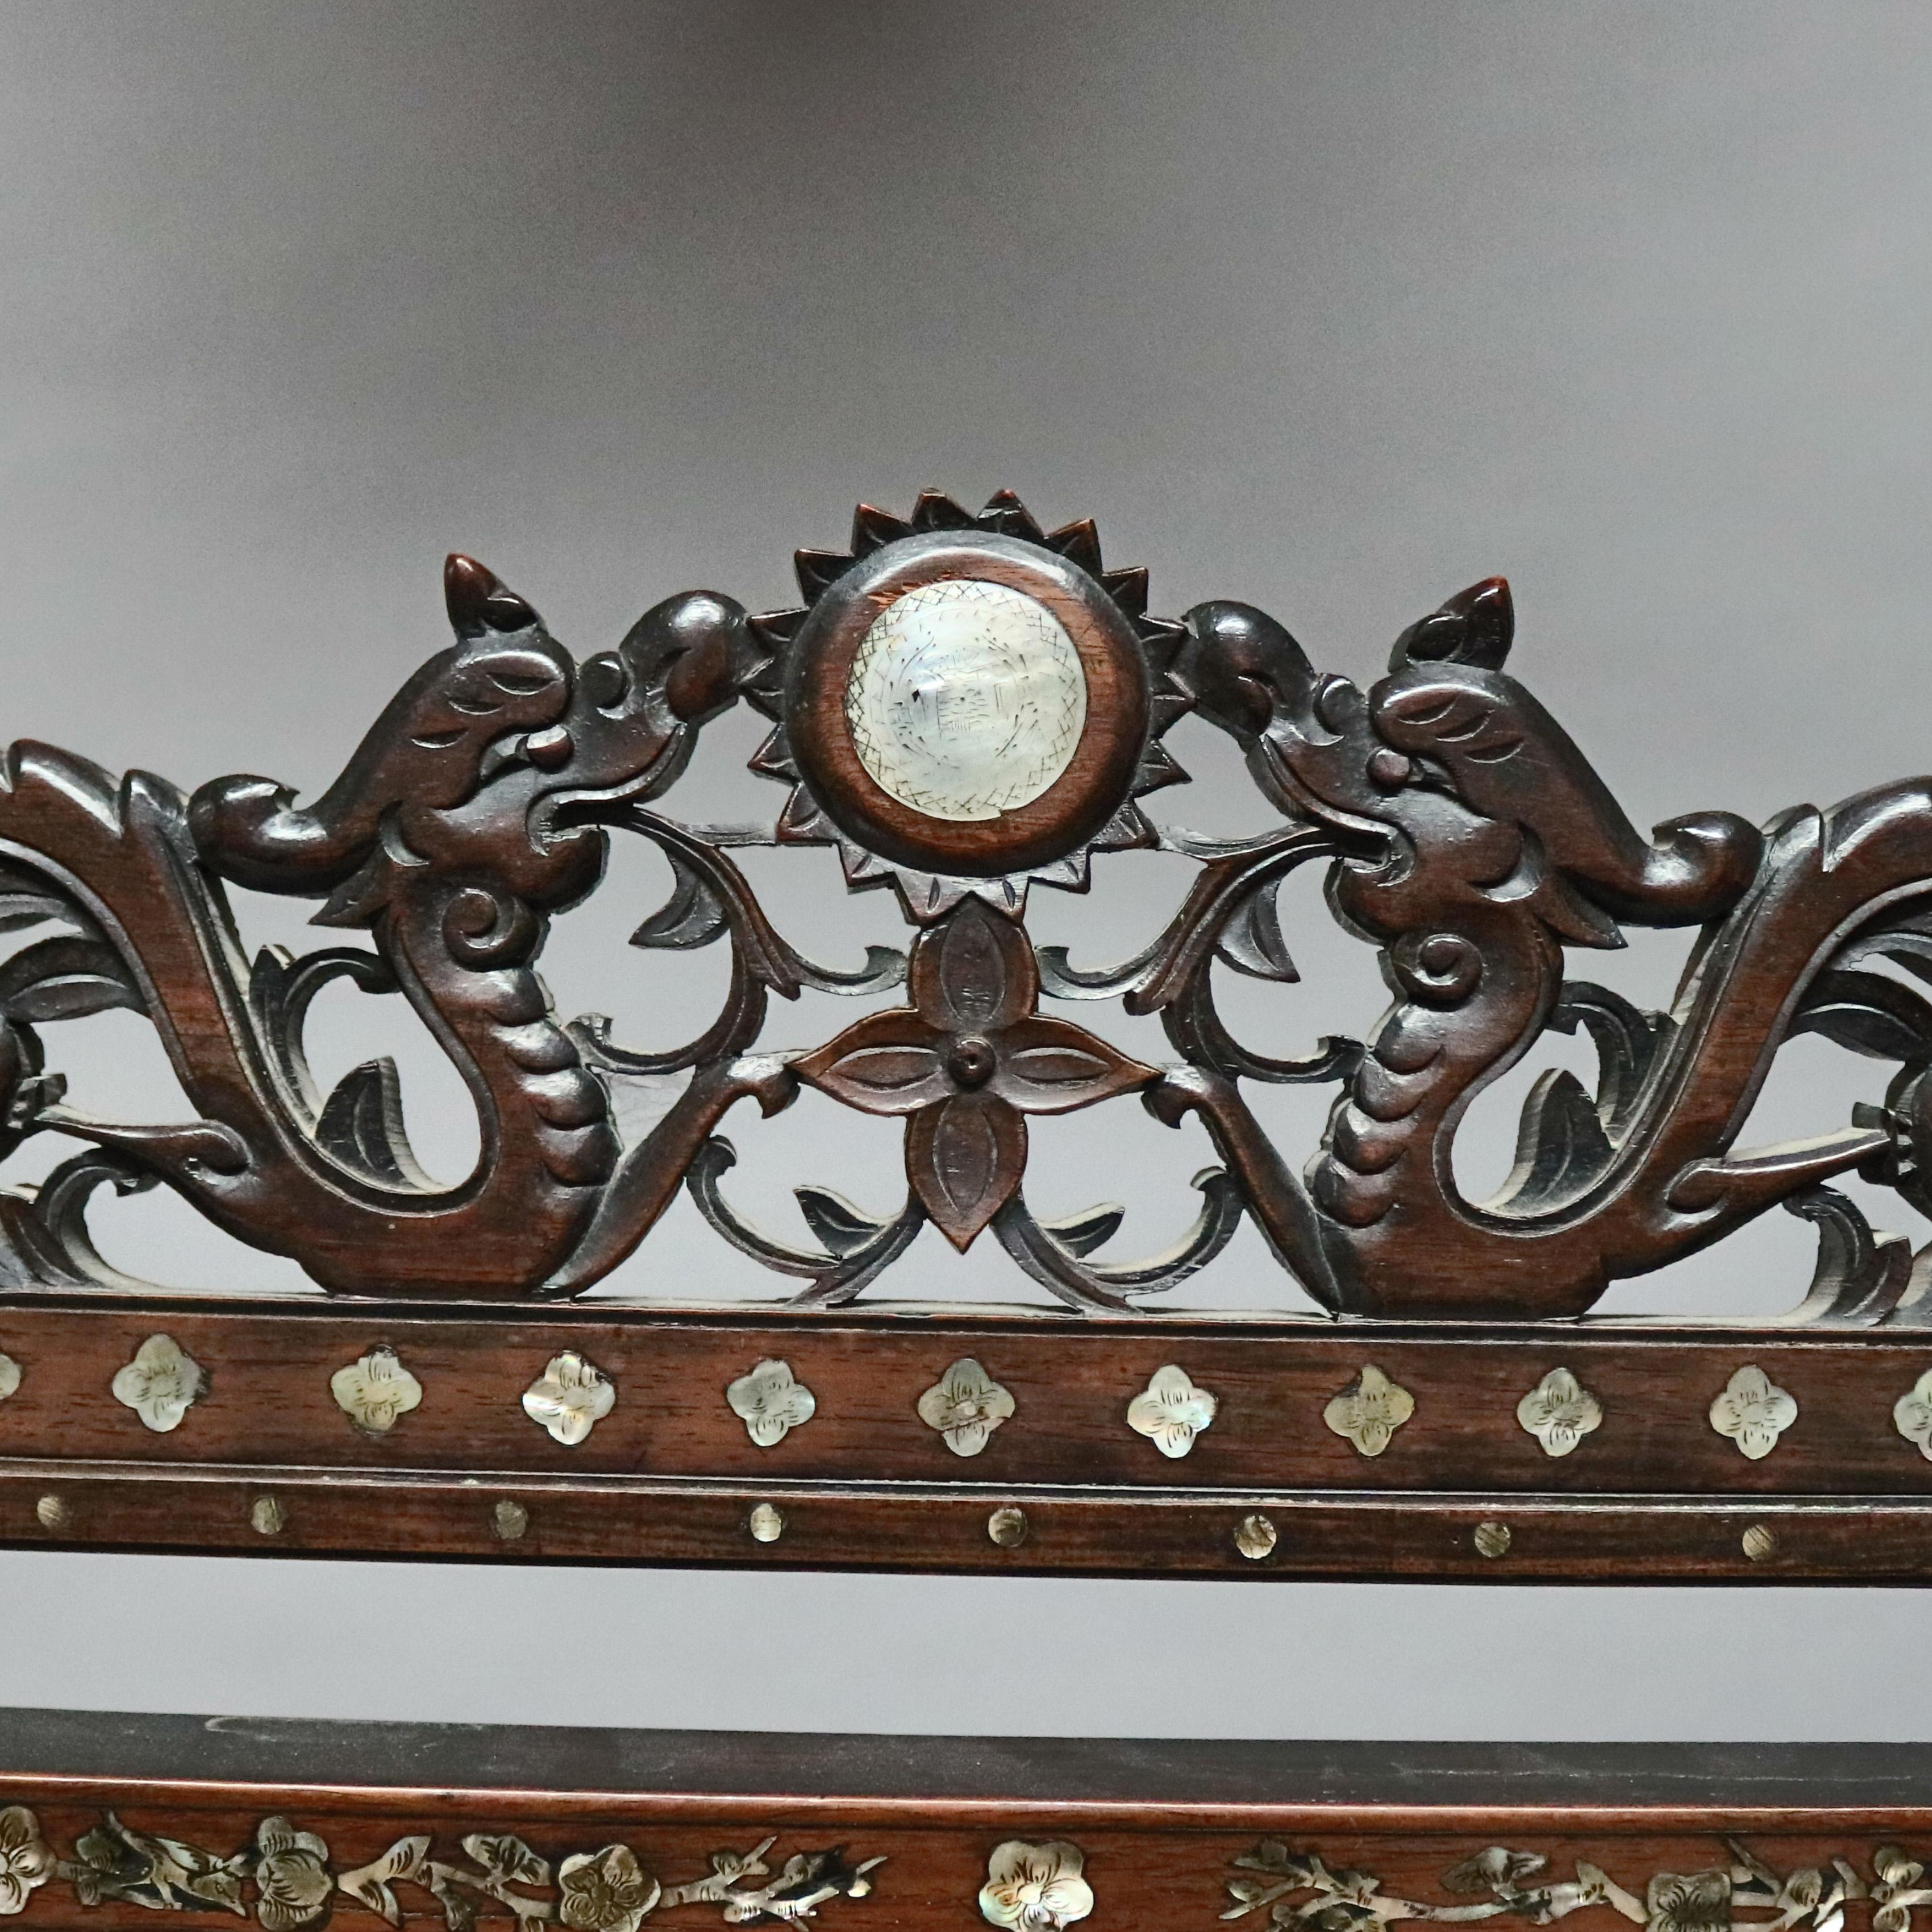 An antique and large Asian table mirror offers carved hardwood construction with dragon and foliate pierced crest surmounting frame having mother of pearl inlaid figures and flowers, swivel mirror and footed base, 20th century

Measures: 36.75